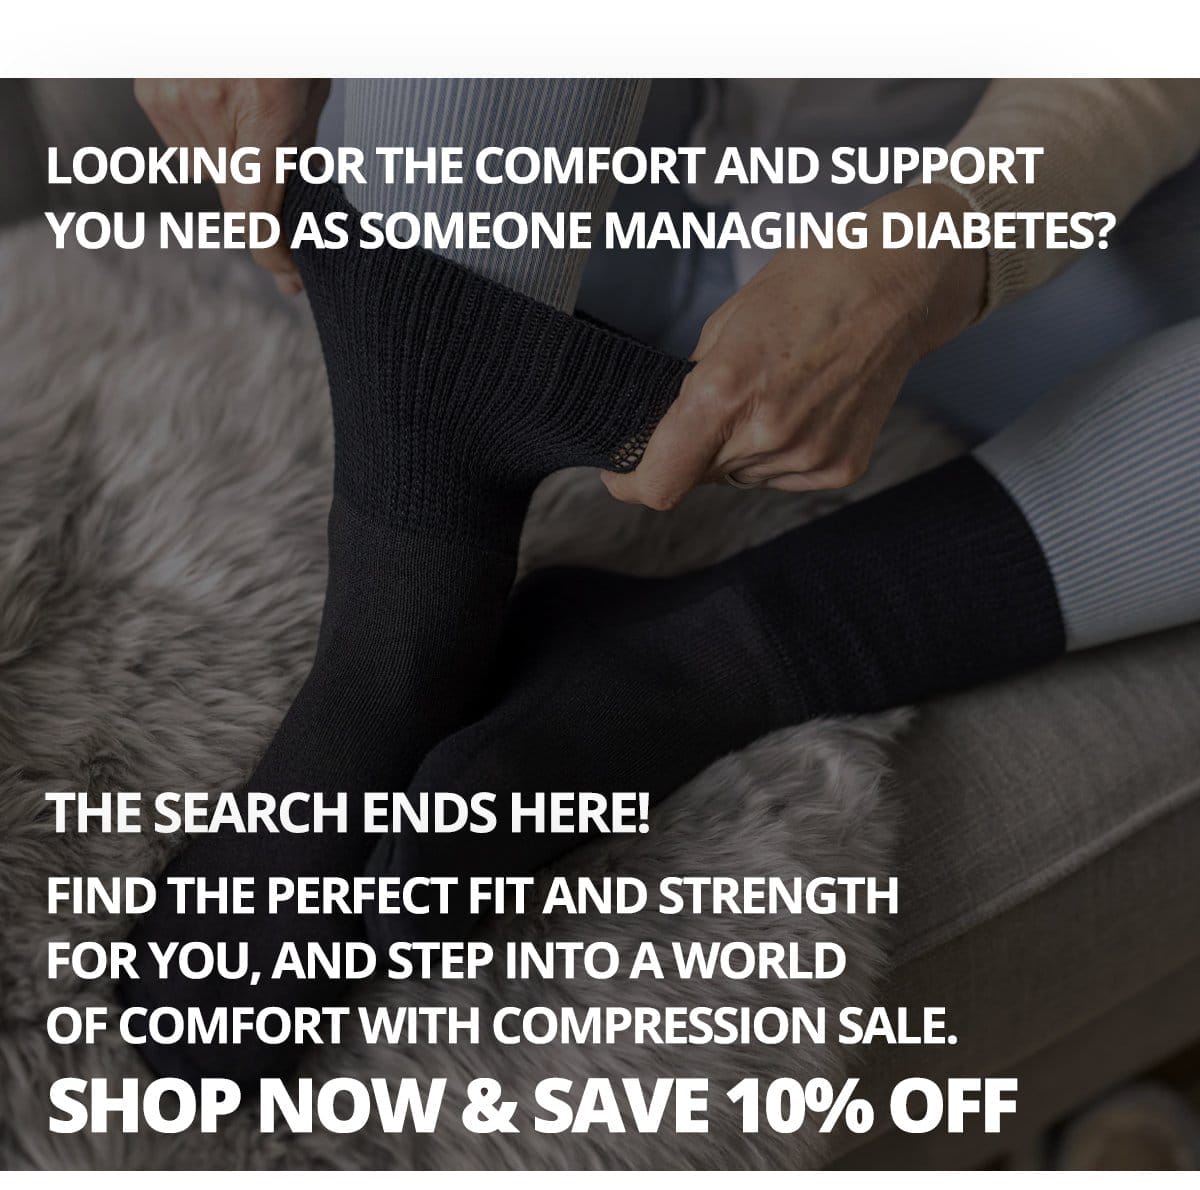 Looking for the comfort and support you need as someone managing diabetes? The search ends here! Find the perfect fit and strength for you, and step into a world of comfort with Compression Sale. Shop Now & Save 10% OFF